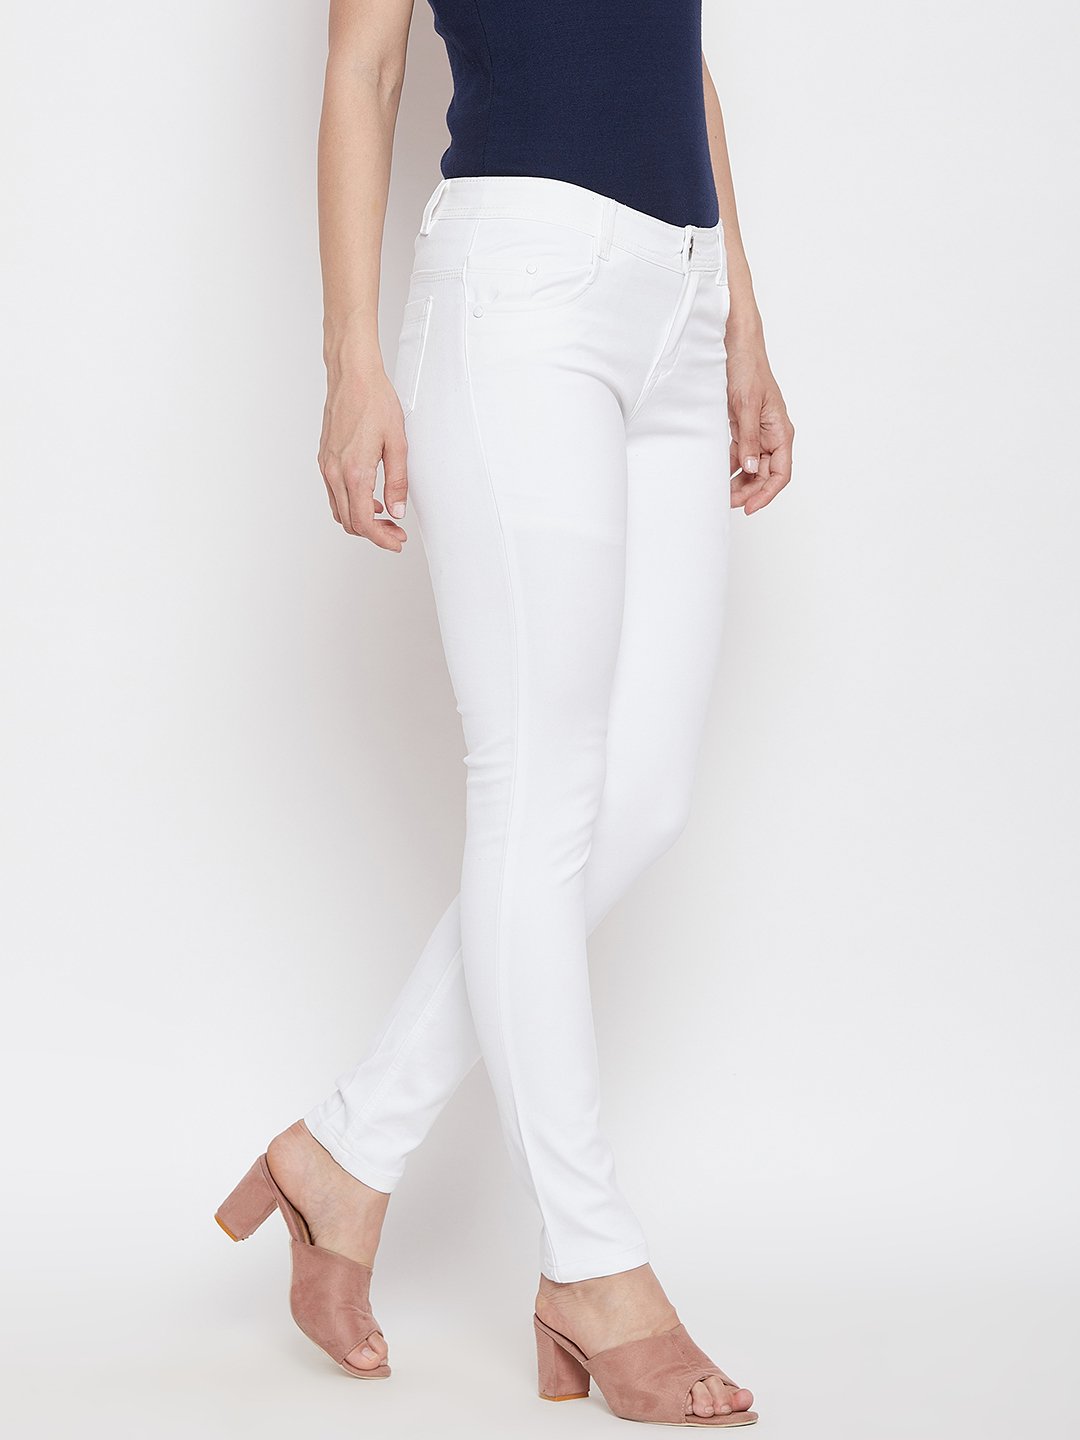 Slim Fit Stretchable White Jeans - NiftyJeans